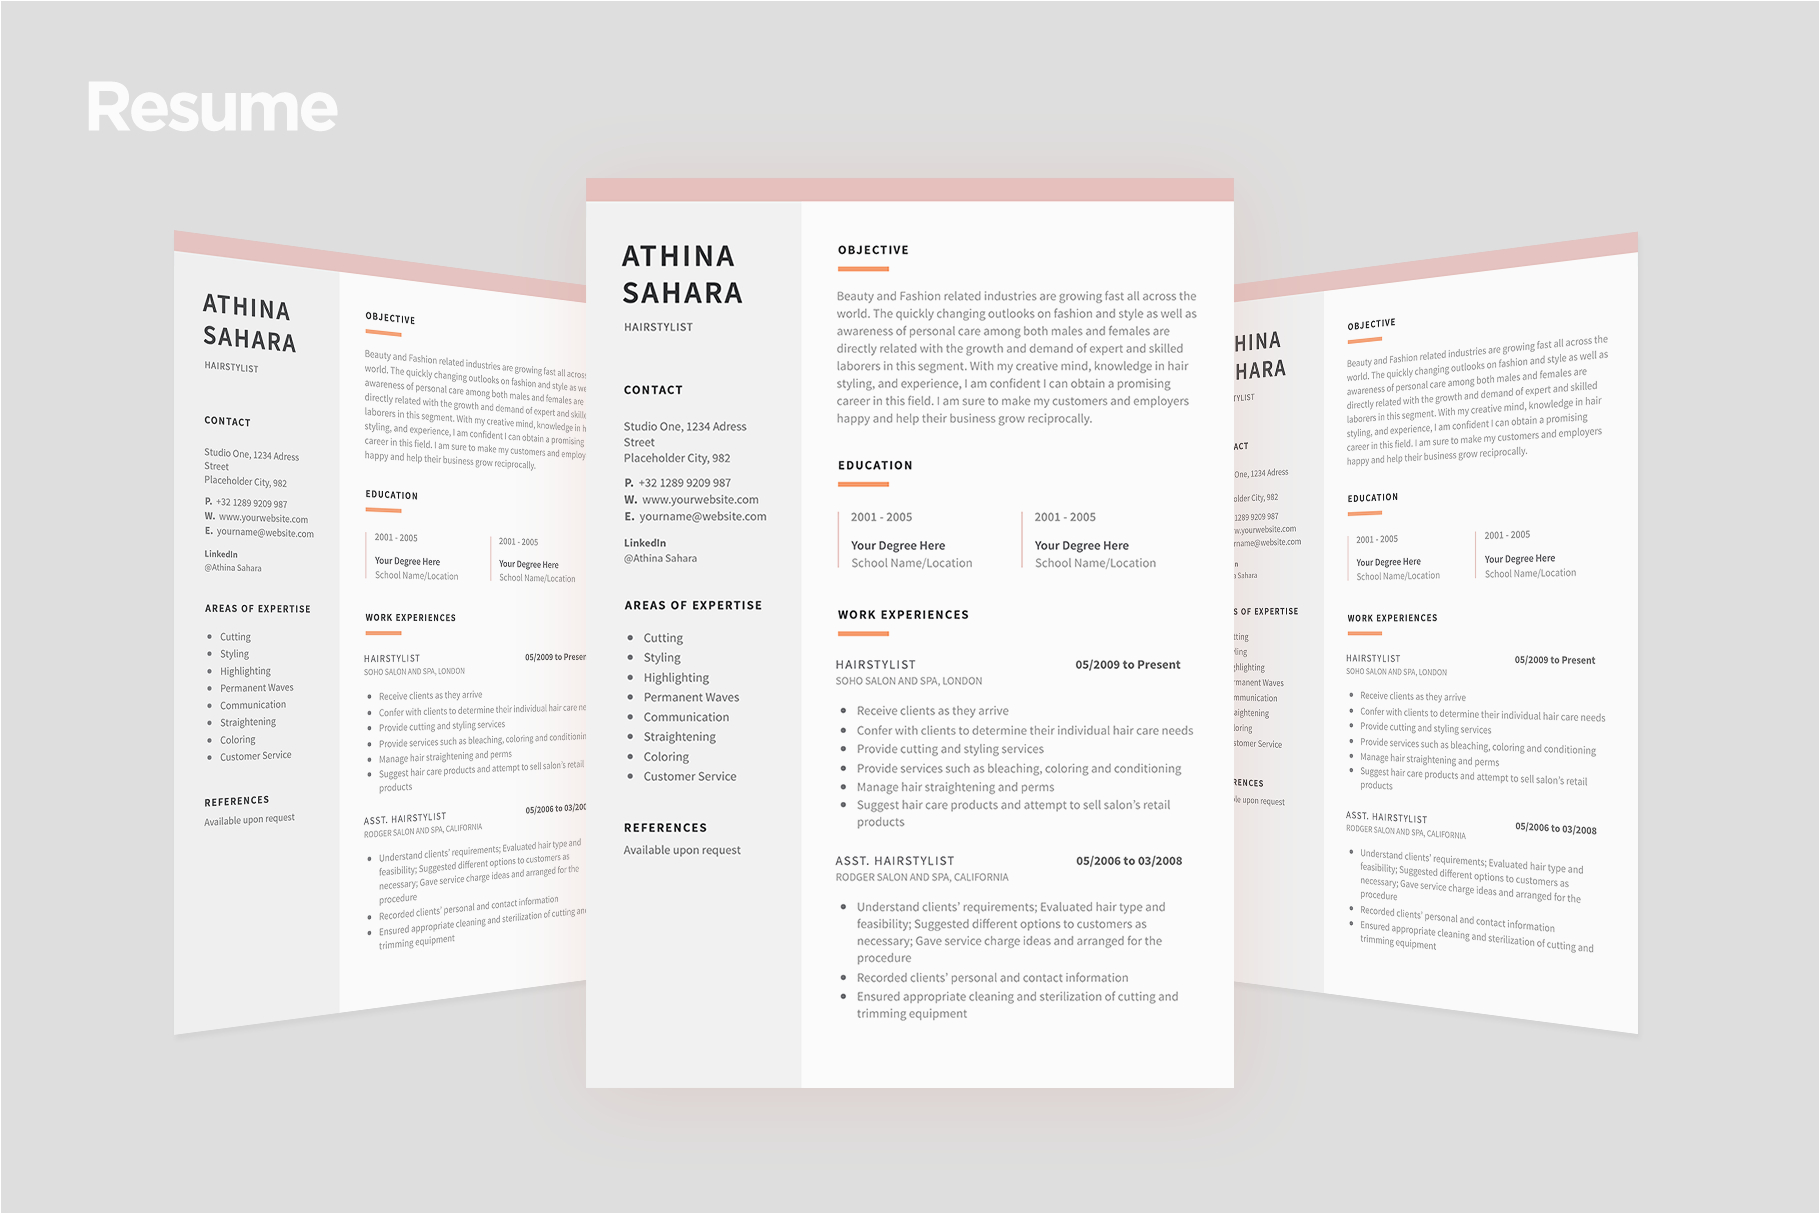 Matching Resume and Cover Letter Templates Resume Template Match with Cover Letter by Ariodsgn